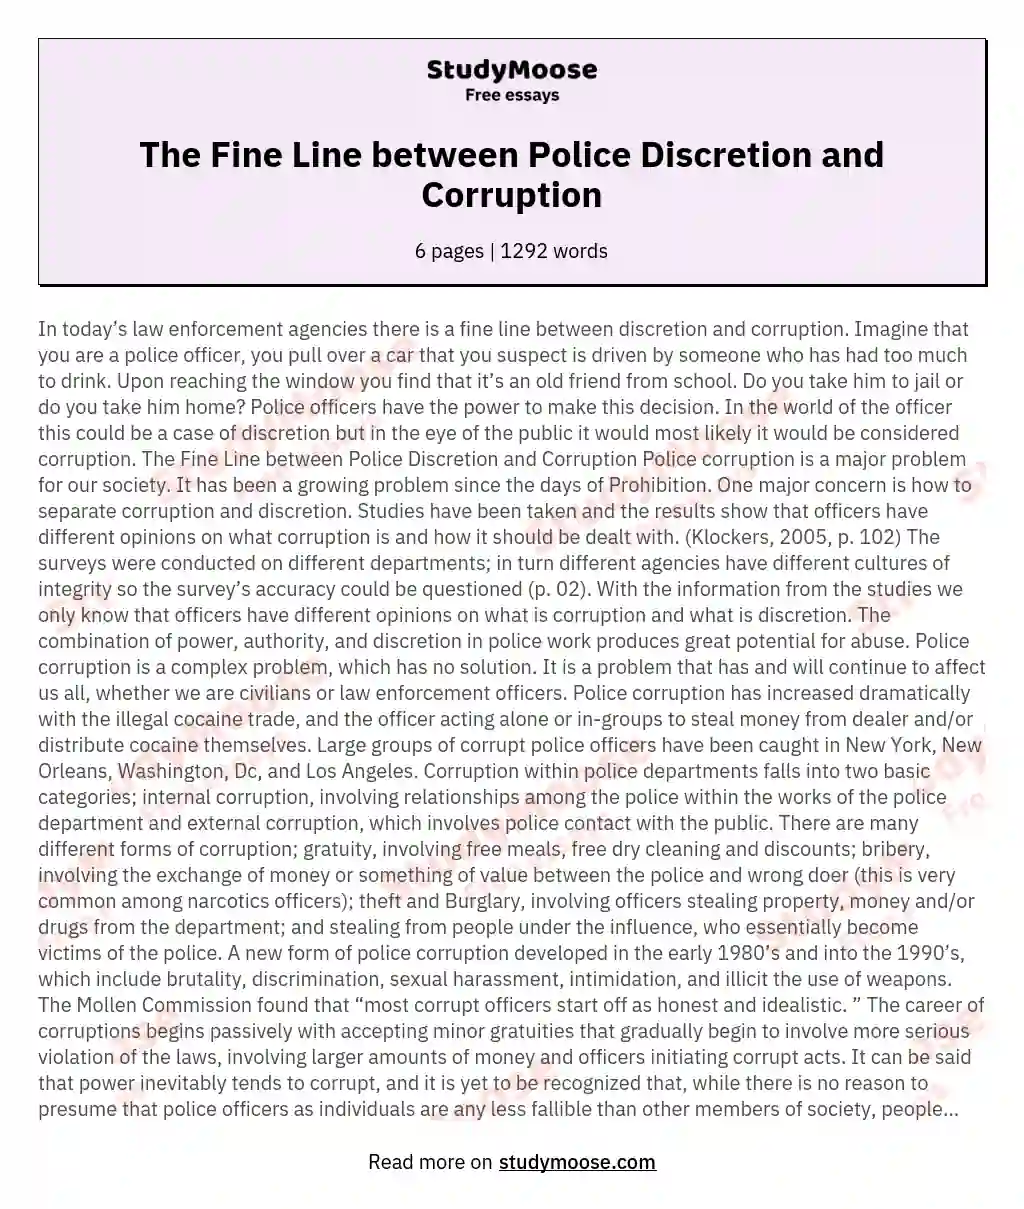 The Fine Line between Police Discretion and Corruption essay